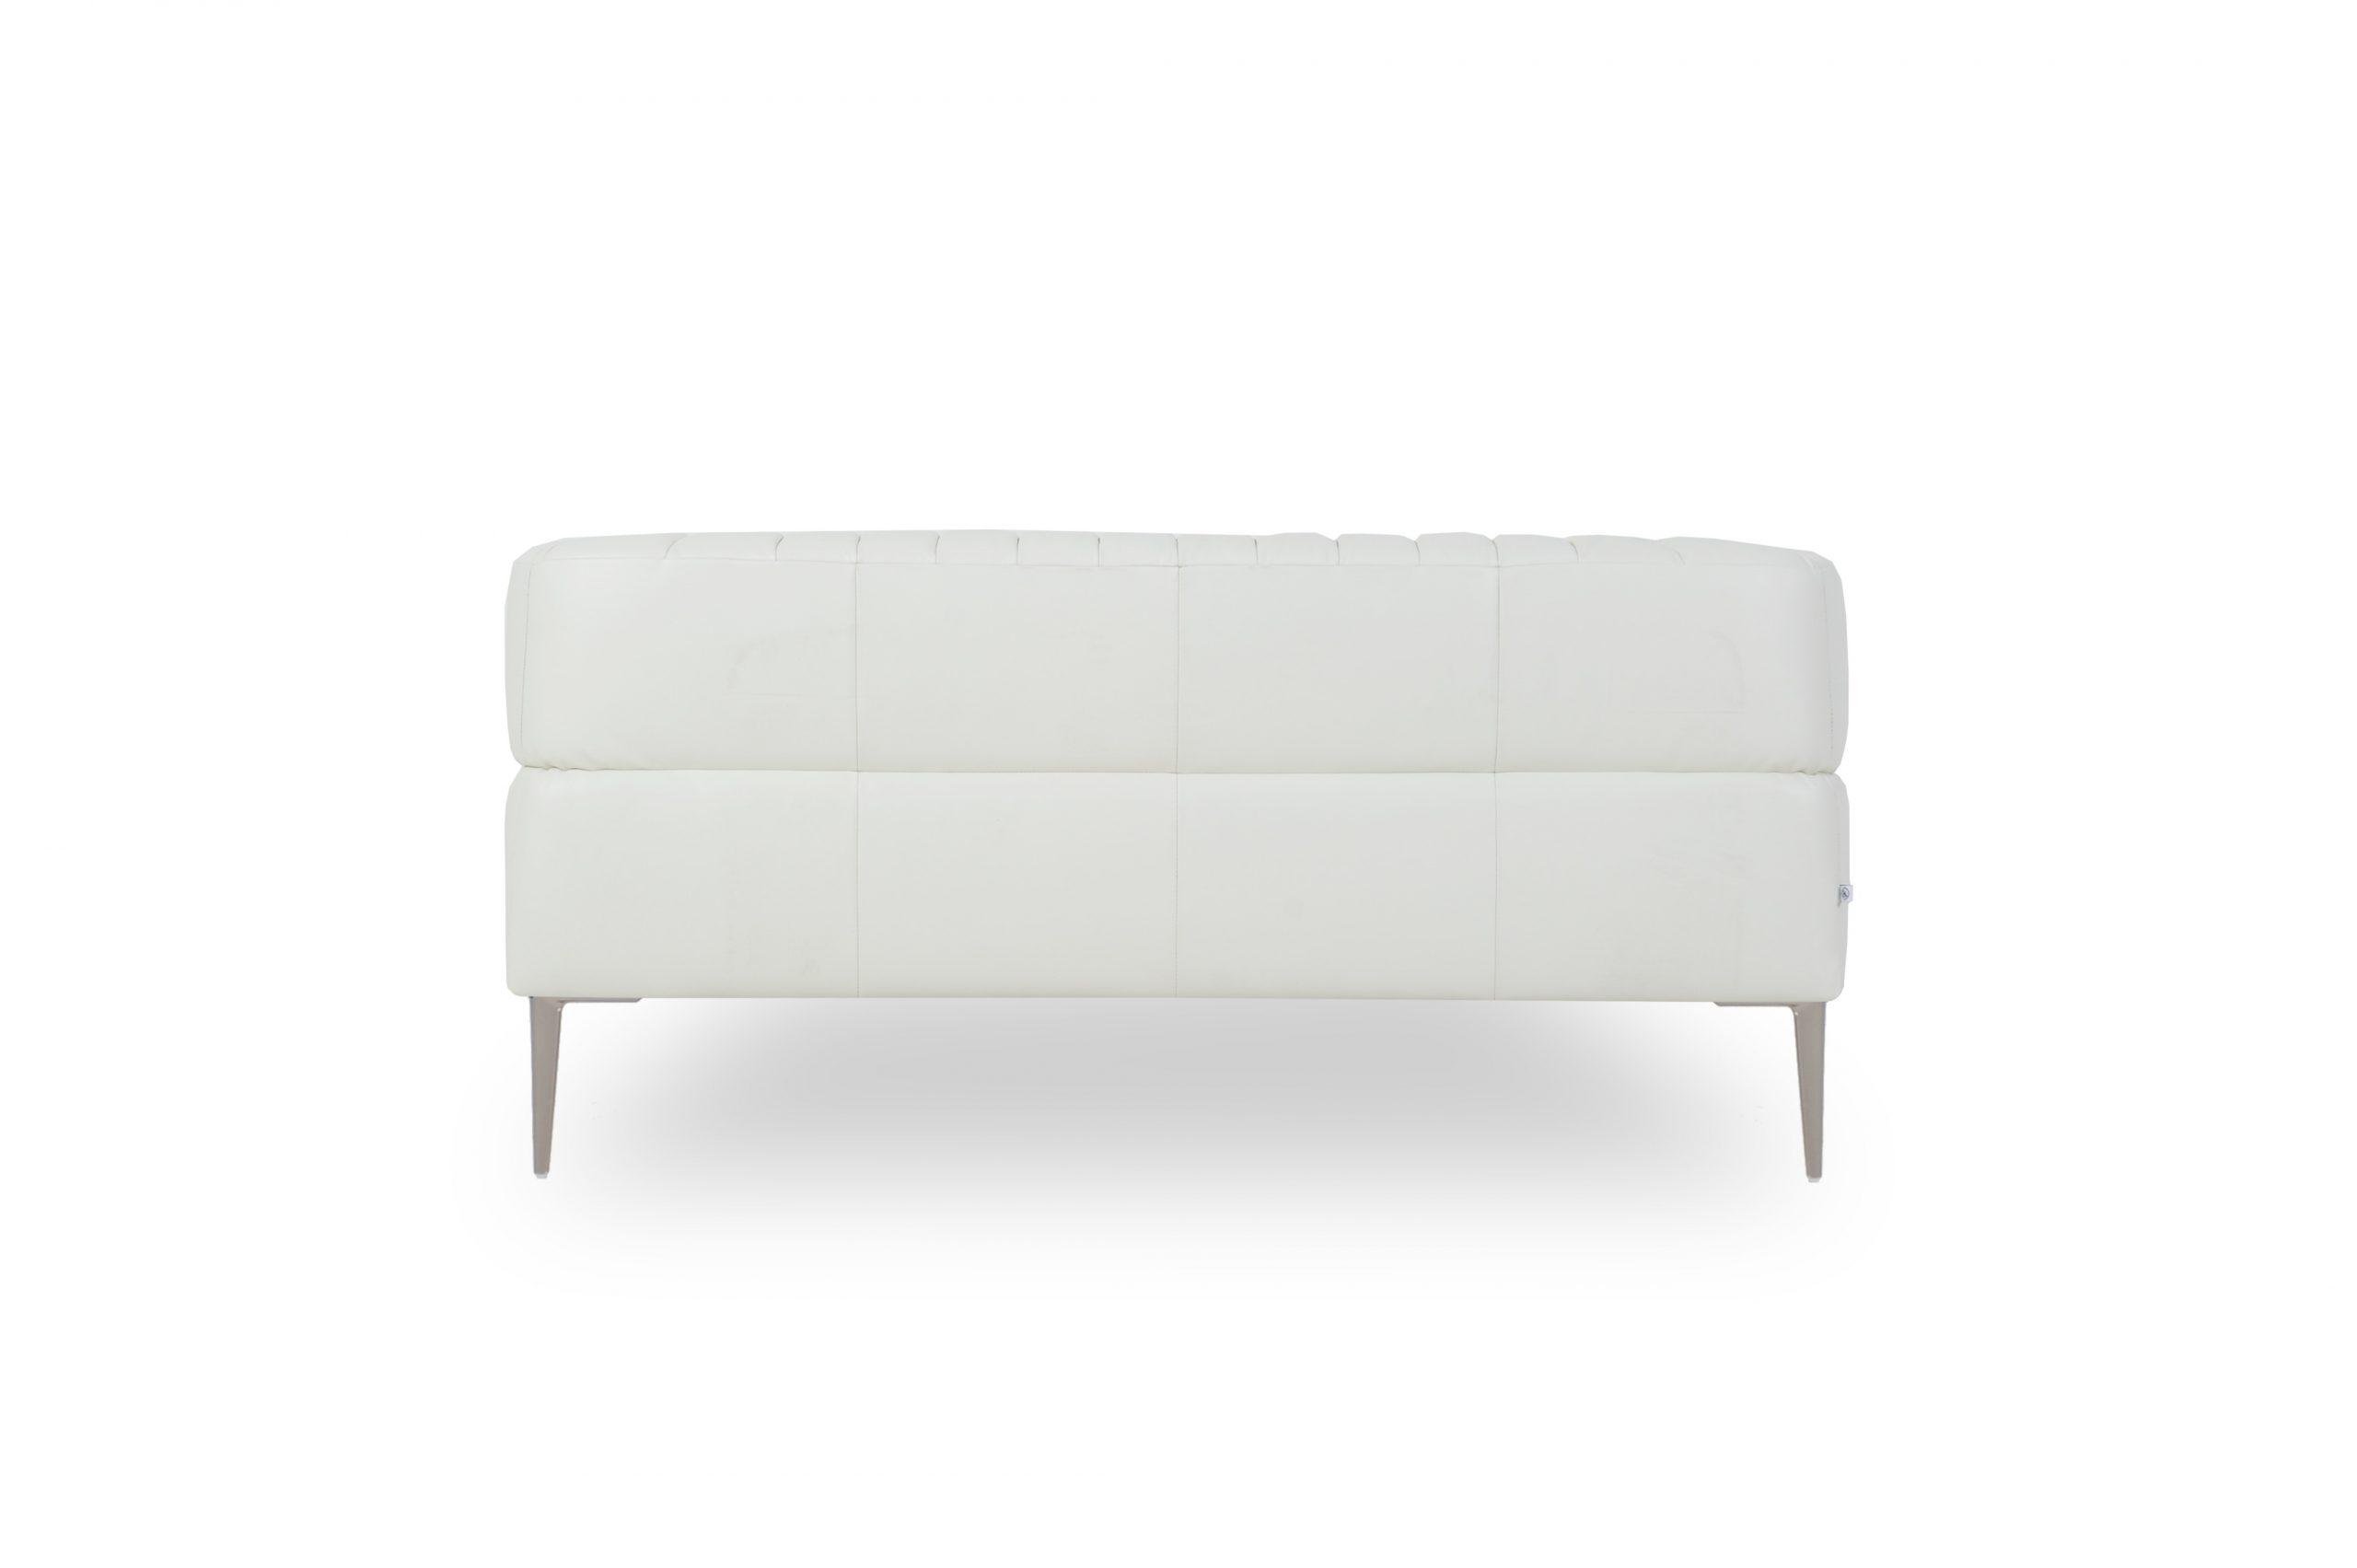 

                    
Moroni 441 - Pearl Loveseat Pearl White Top grain leather Purchase 
